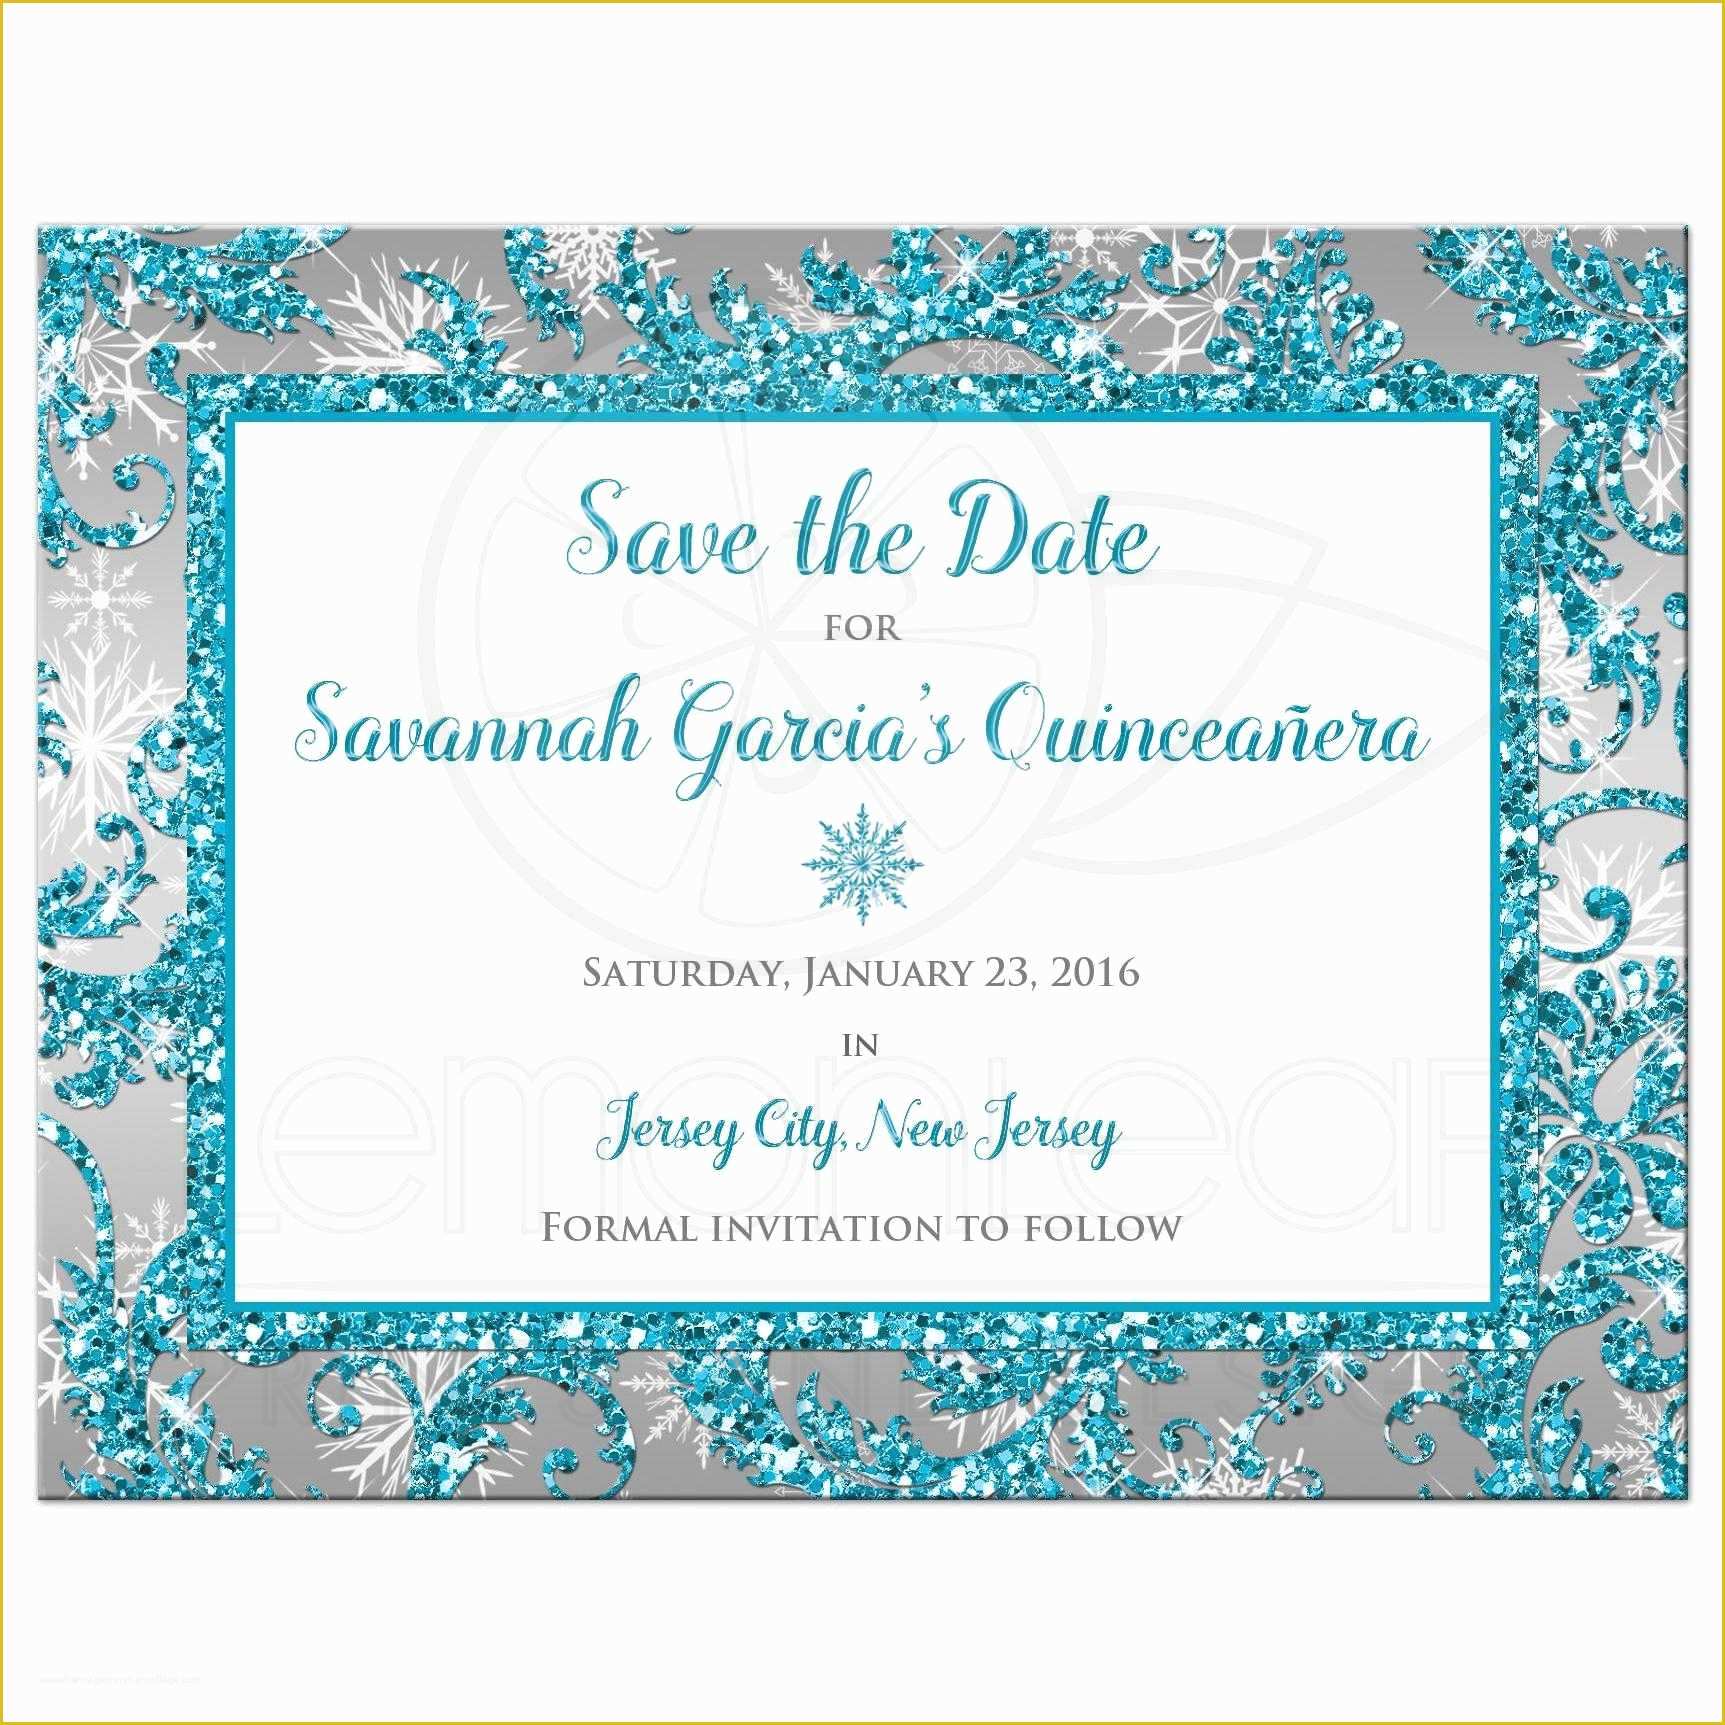 Free Quinceanera Save the Date Templates Of Quinceañera Save the Date Card